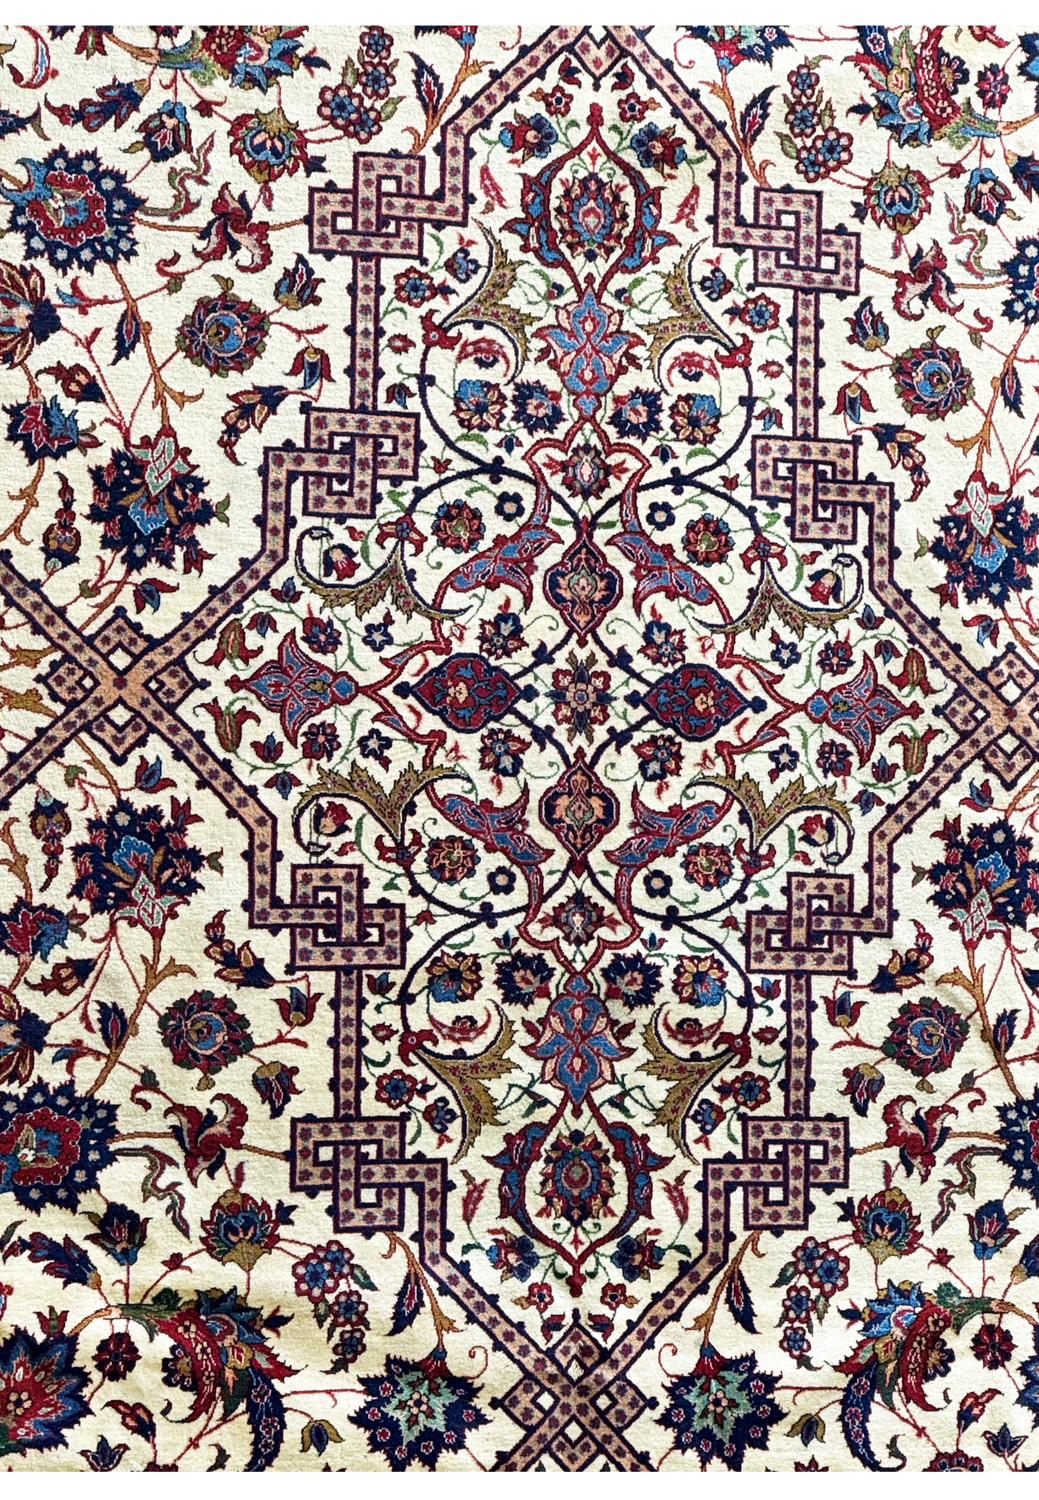 Close-up of the Persian Isfahan rug showing a central medallion with intricate designs in red, blue, and beige tones.